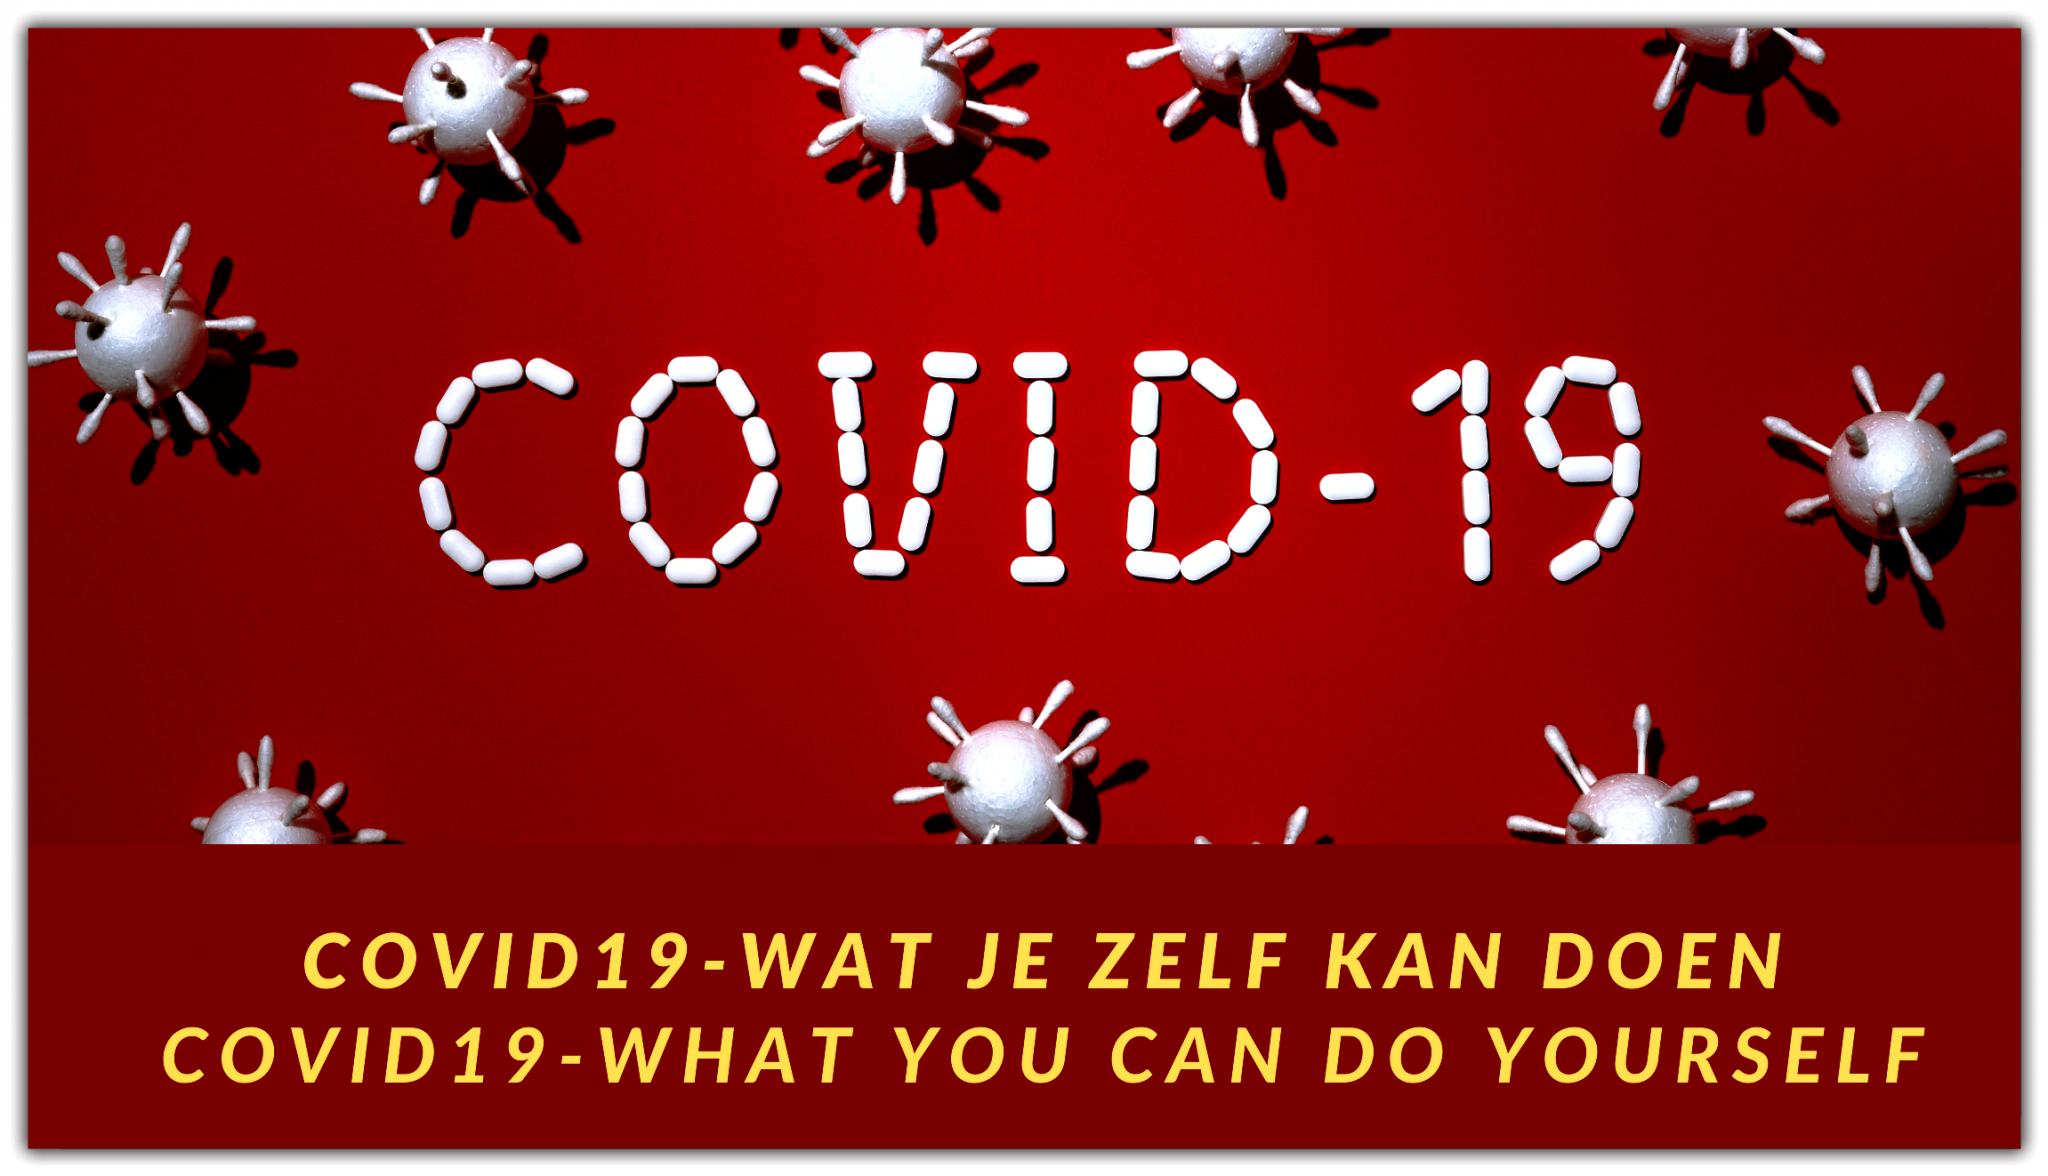 COVID19-WAT JE ZELF KAN DOEN ||COVID19-WHAT YOU CAN DO YOURSELF